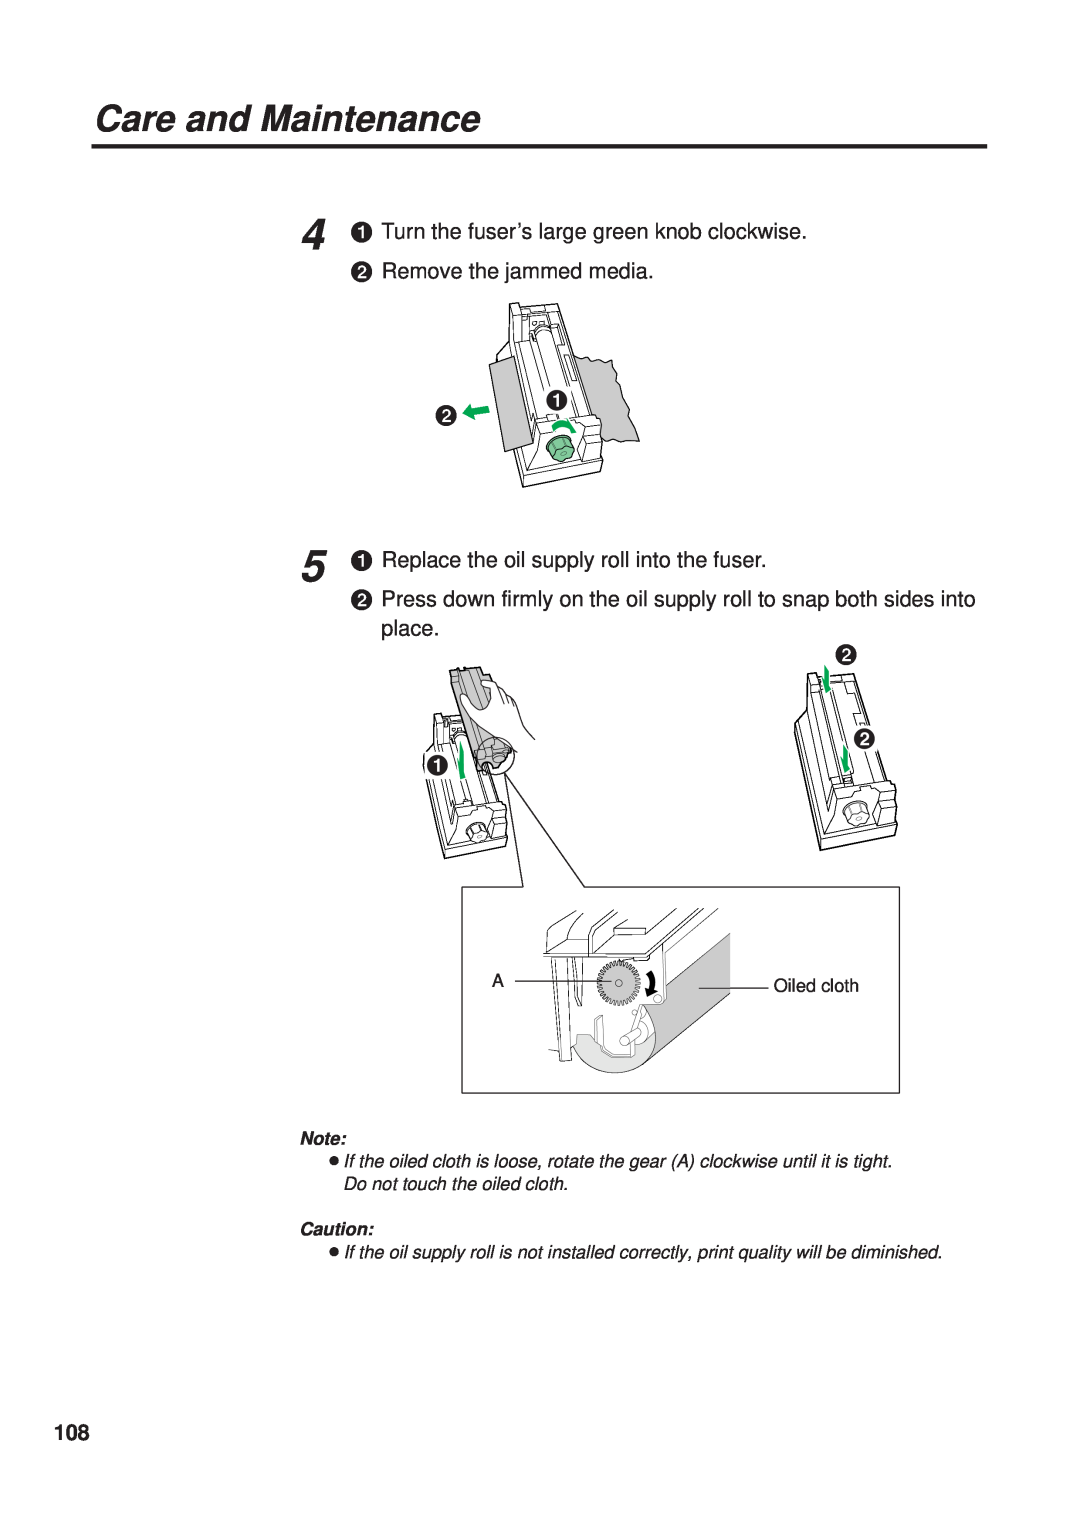 Panasonic KX-PS8000 4 # Turn the fuser’s large green knob clockwise, 5 # Replace the oil supply roll into the fuser, $ $ # 